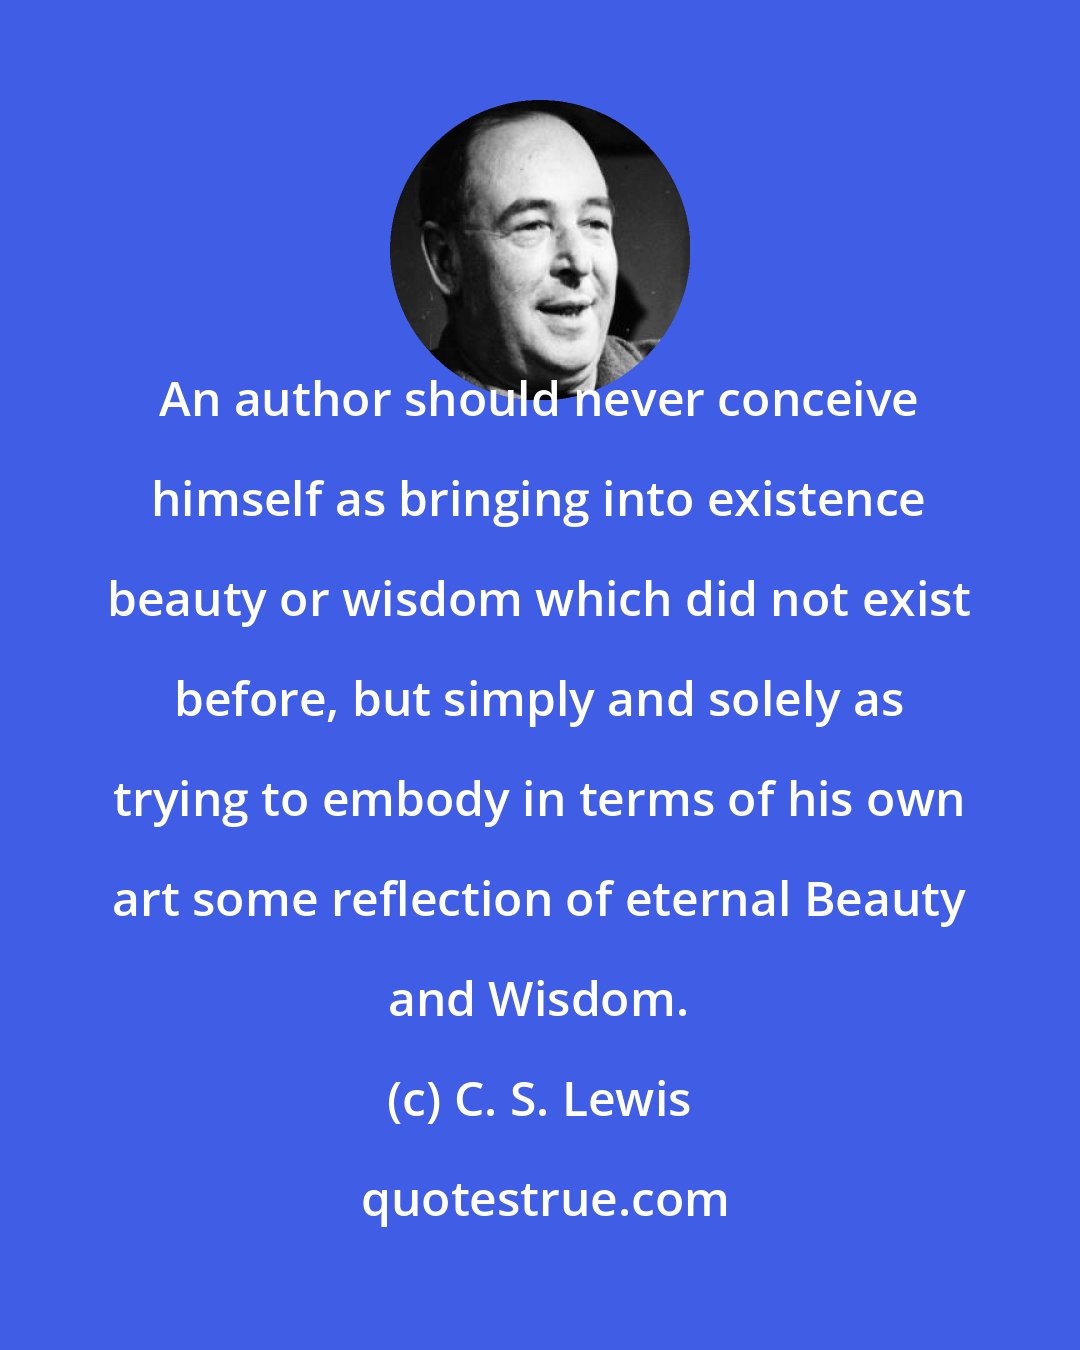 C. S. Lewis: An author should never conceive himself as bringing into existence beauty or wisdom which did not exist before, but simply and solely as trying to embody in terms of his own art some reflection of eternal Beauty and Wisdom.